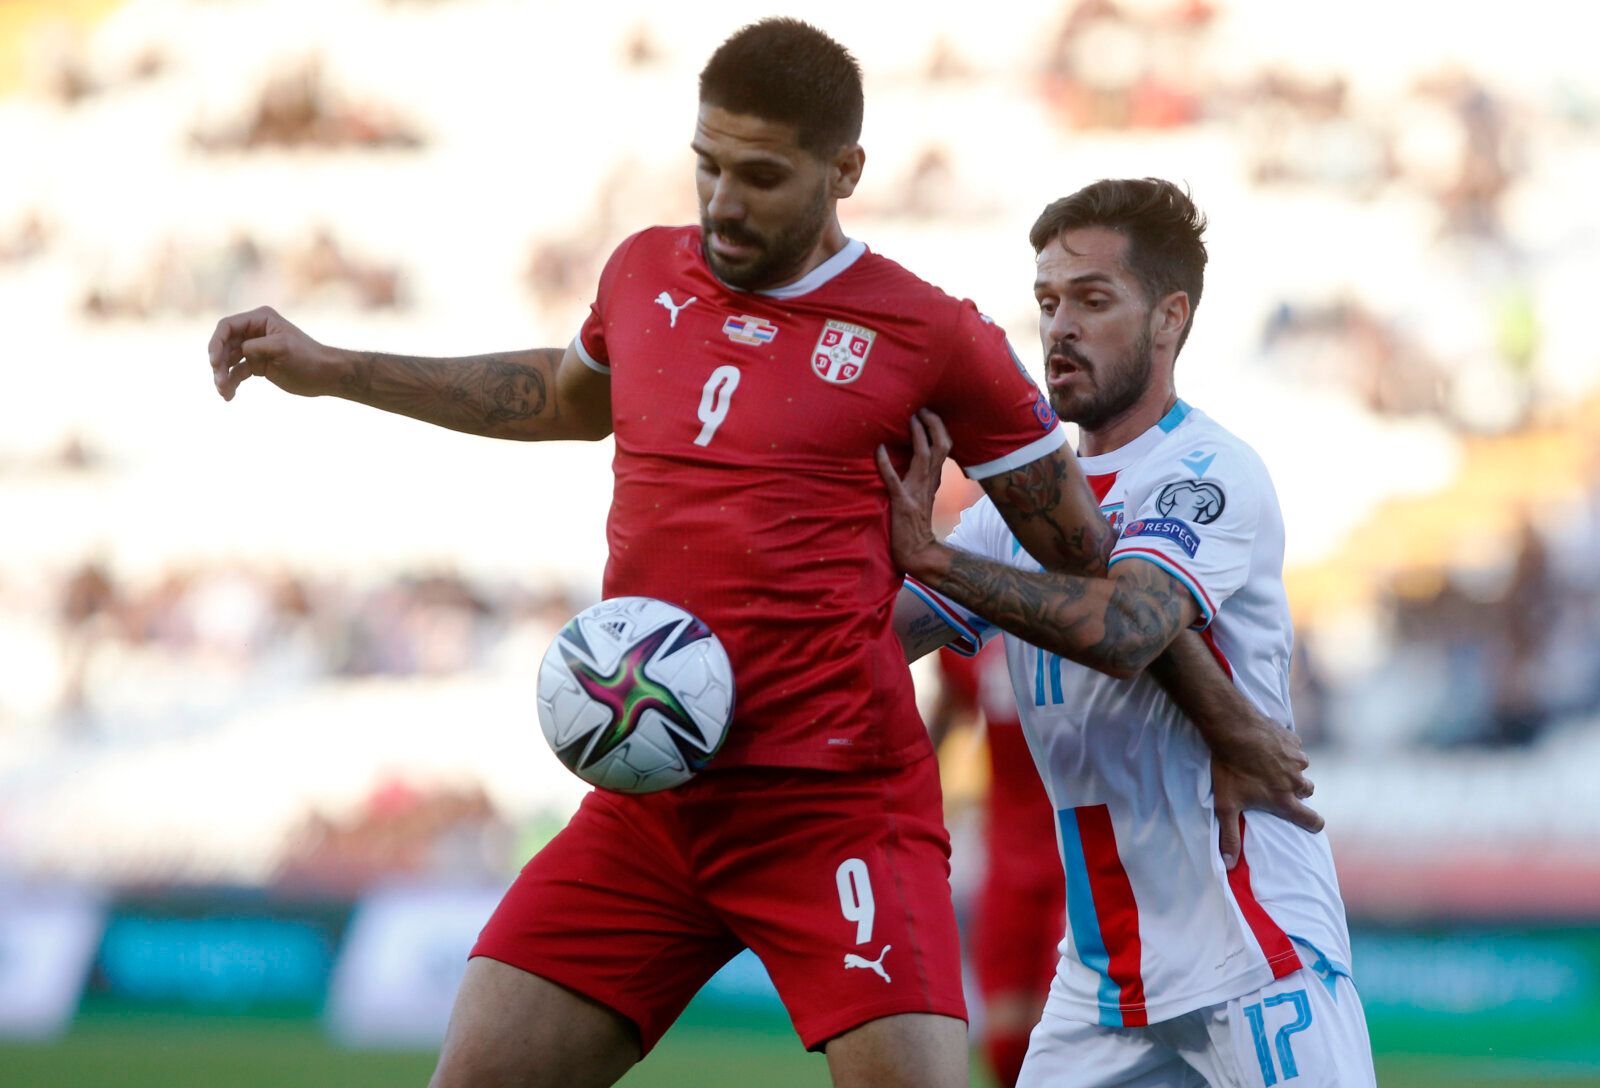 Soccer Football - World Cup - UEFA Qualifiers - Group A - Serbia v Luxembourg - Rajko Mitic Stadium, Belgrade, Serbia - September 4, 2021 Serbia's Aleksandar Mitrovic in action with Luxembourg's Mica Pinto REUTERS/Novak Djurovic